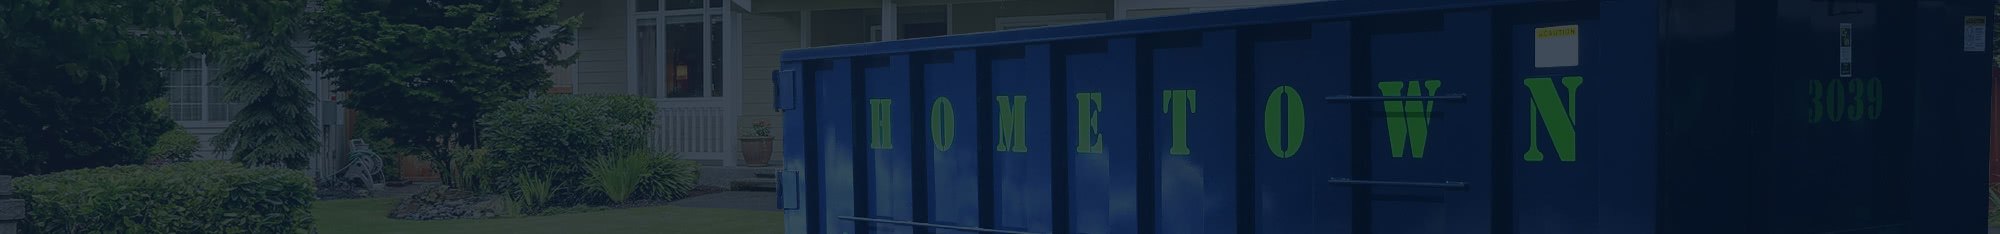 How To Load A Dumpster Safely And What Not To Do | Hometown Waste